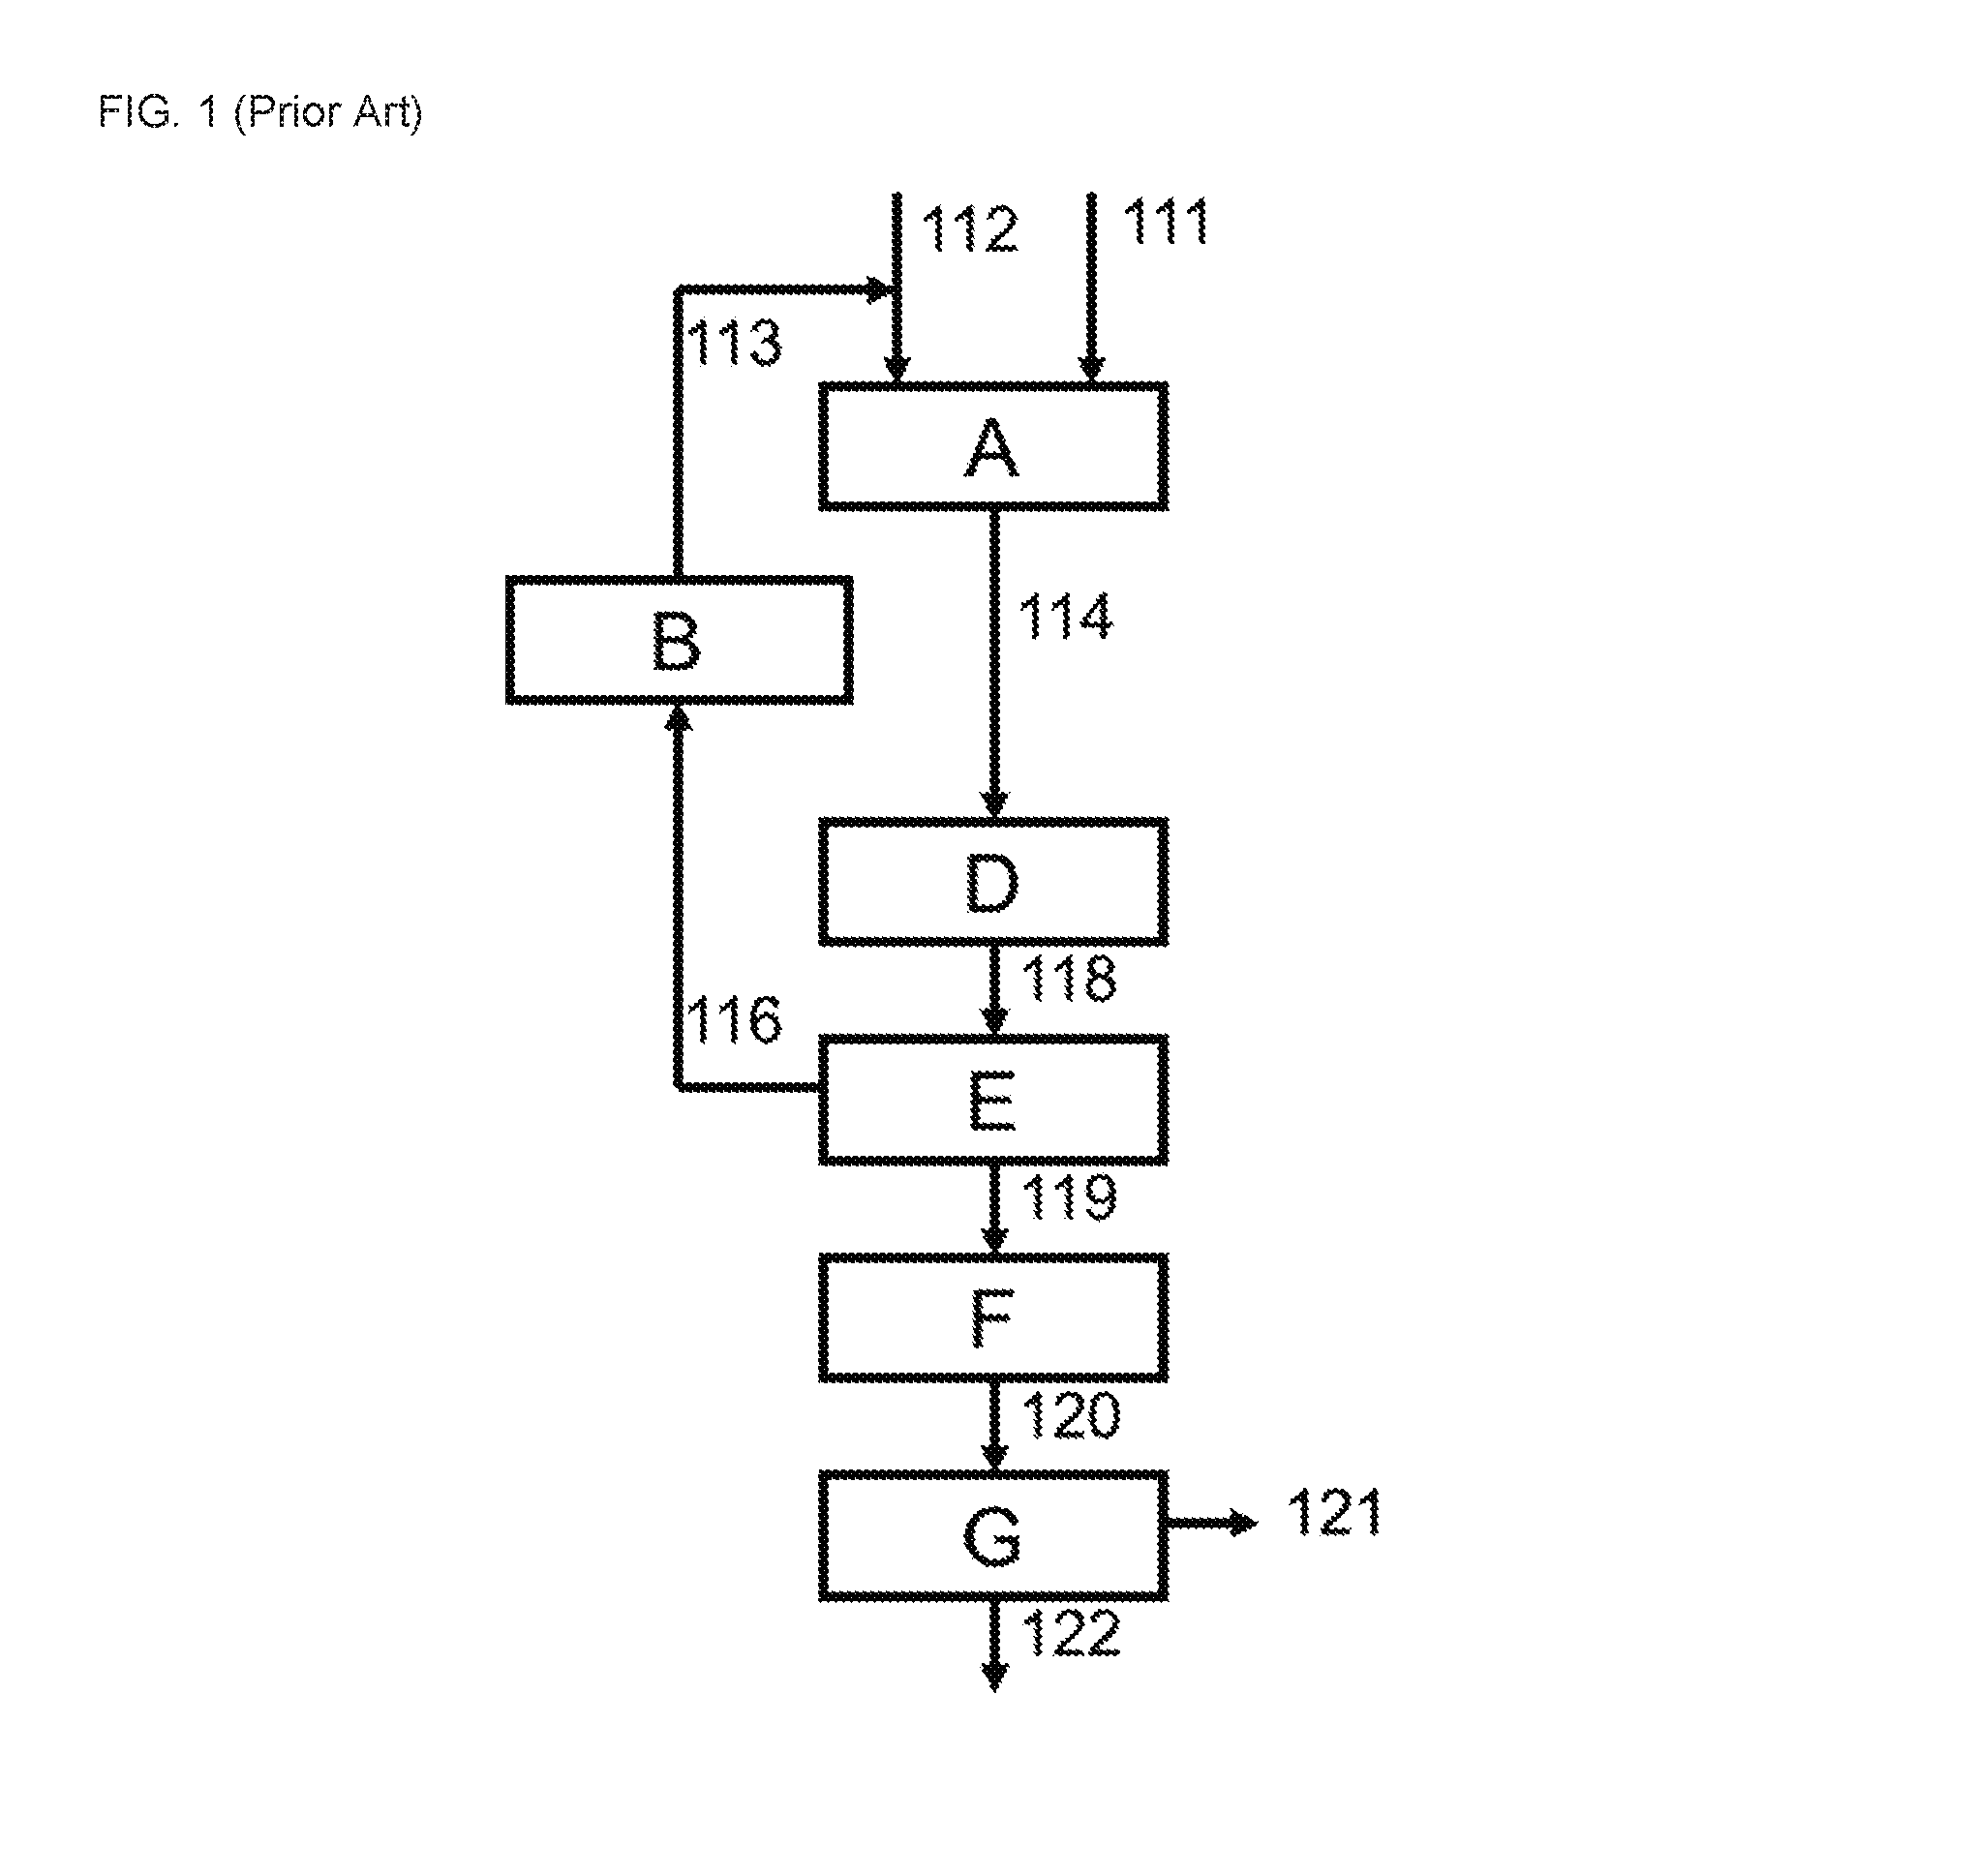 Process for the production of a mixture comprising cyclohexanone and cyclohexanol from phenol